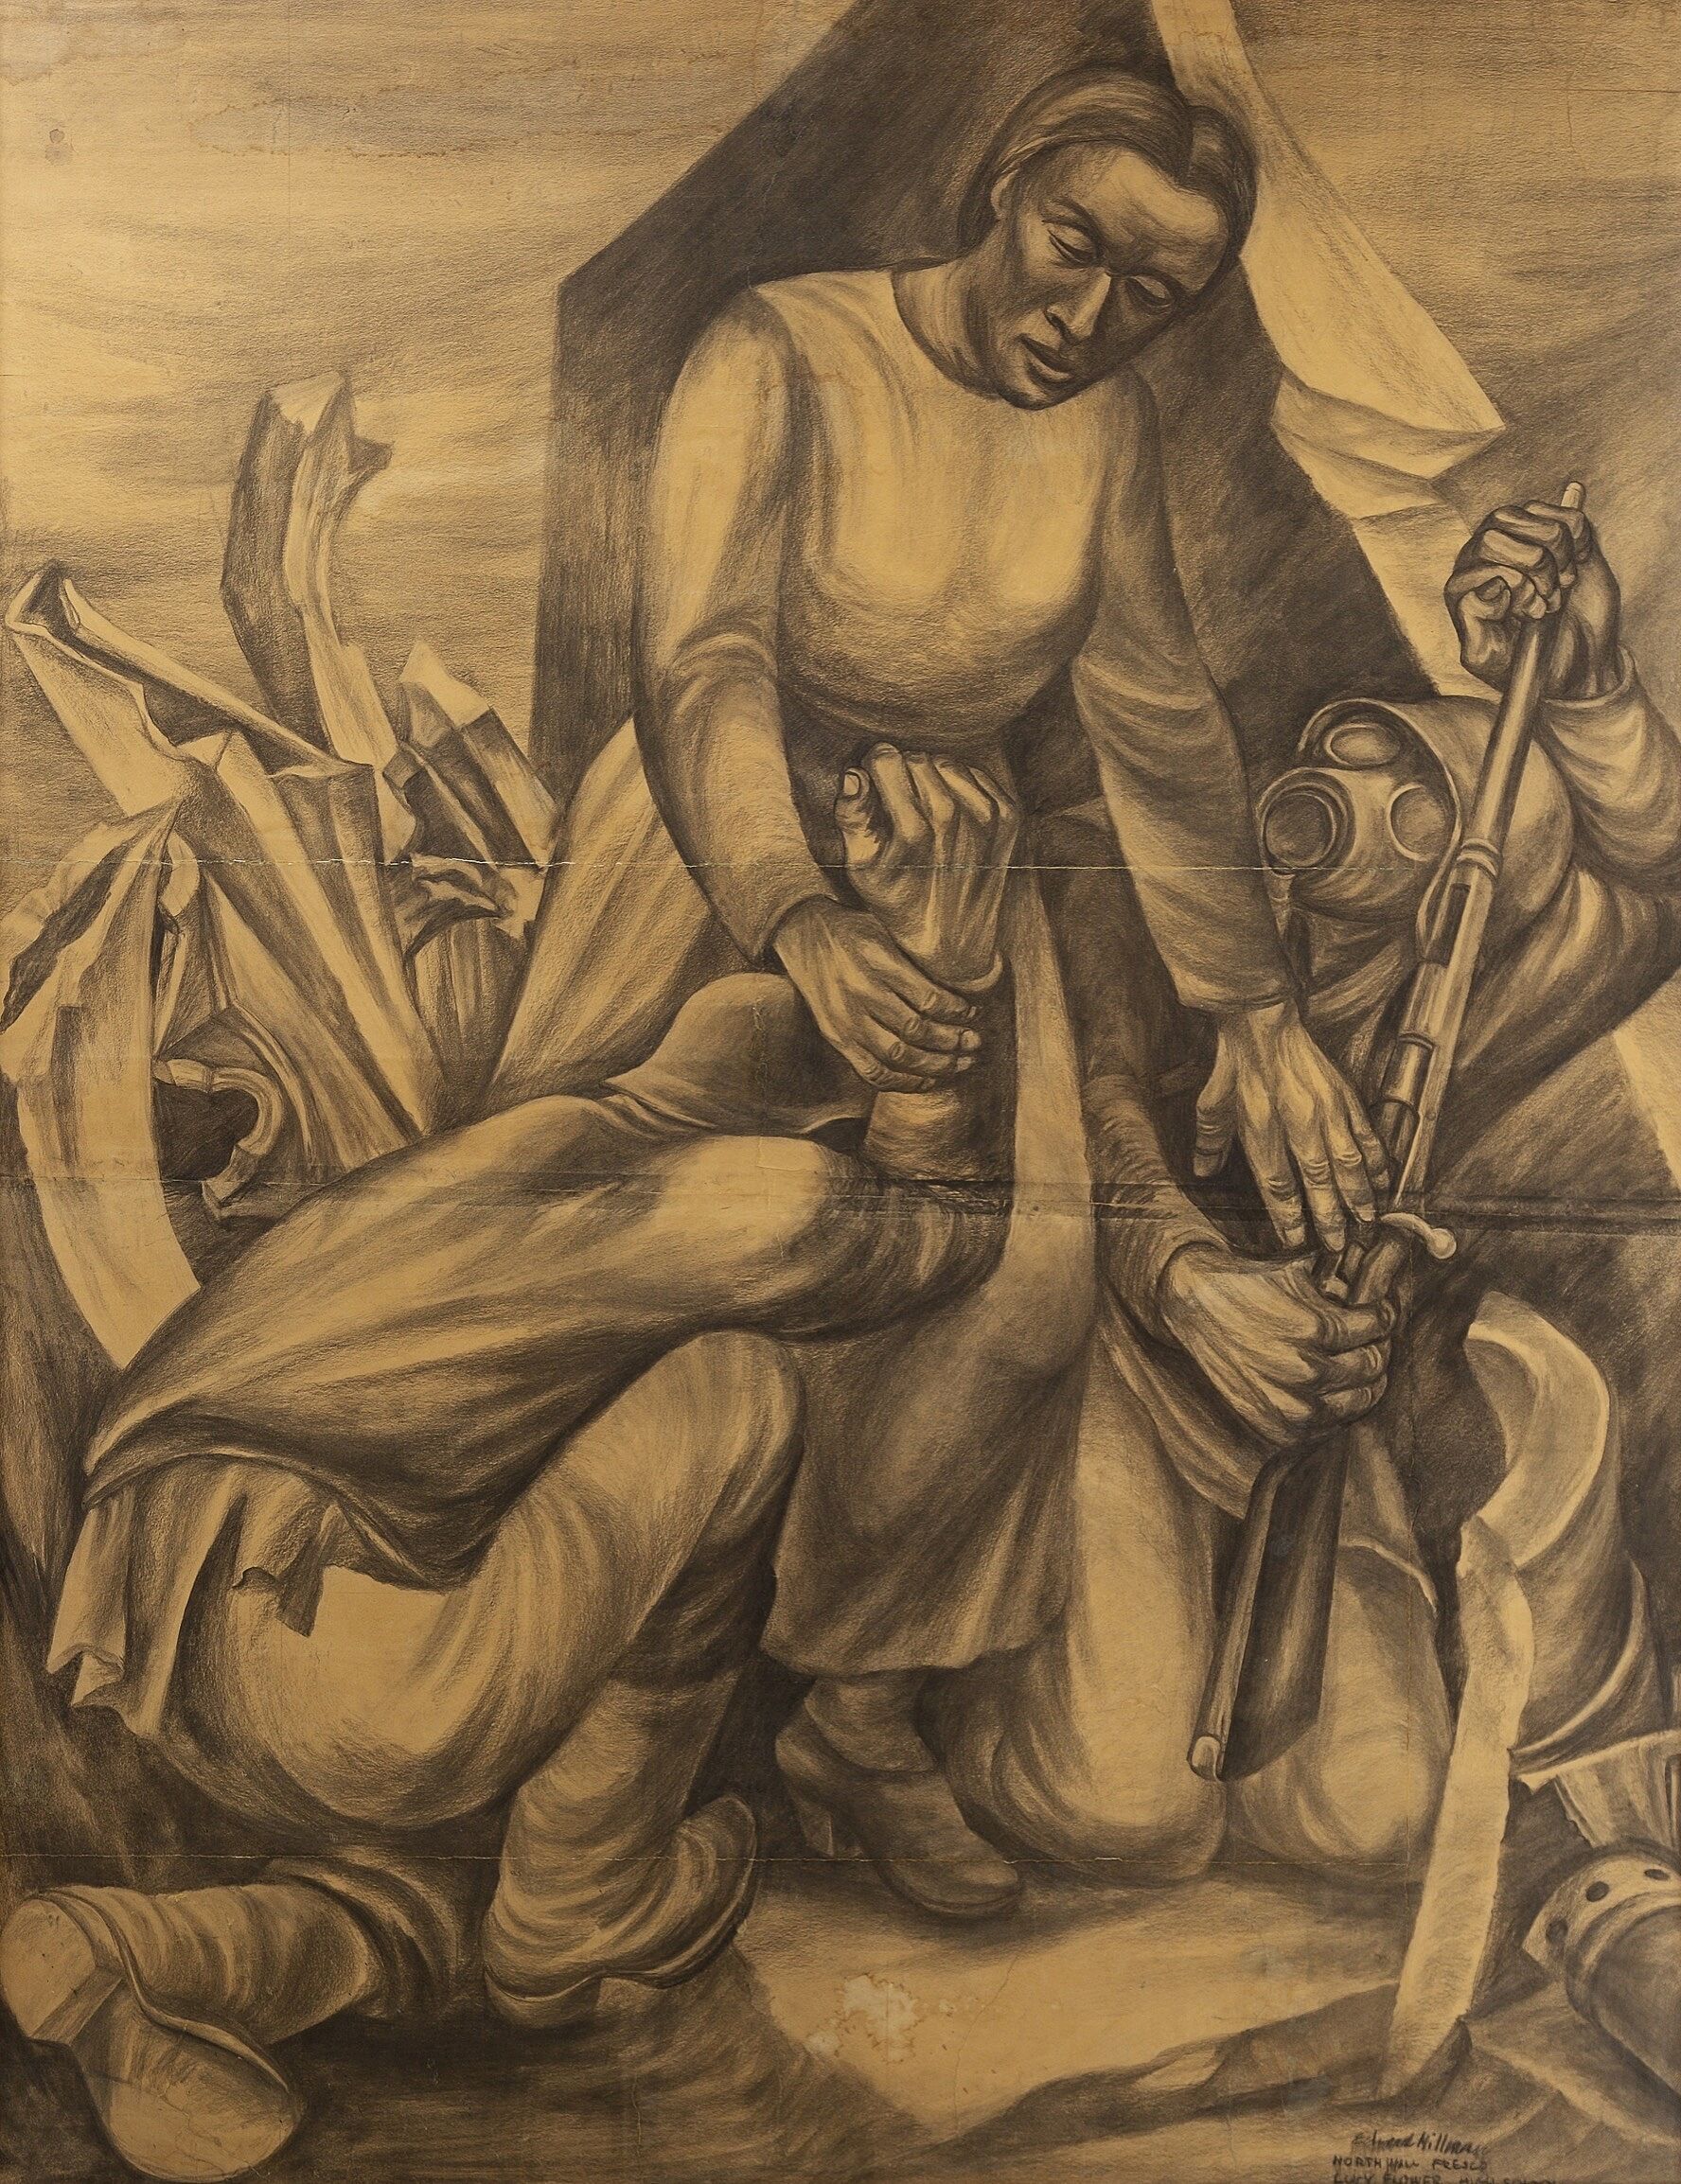 A drawing depicting a woman reaching for two men kneeling on the ground.